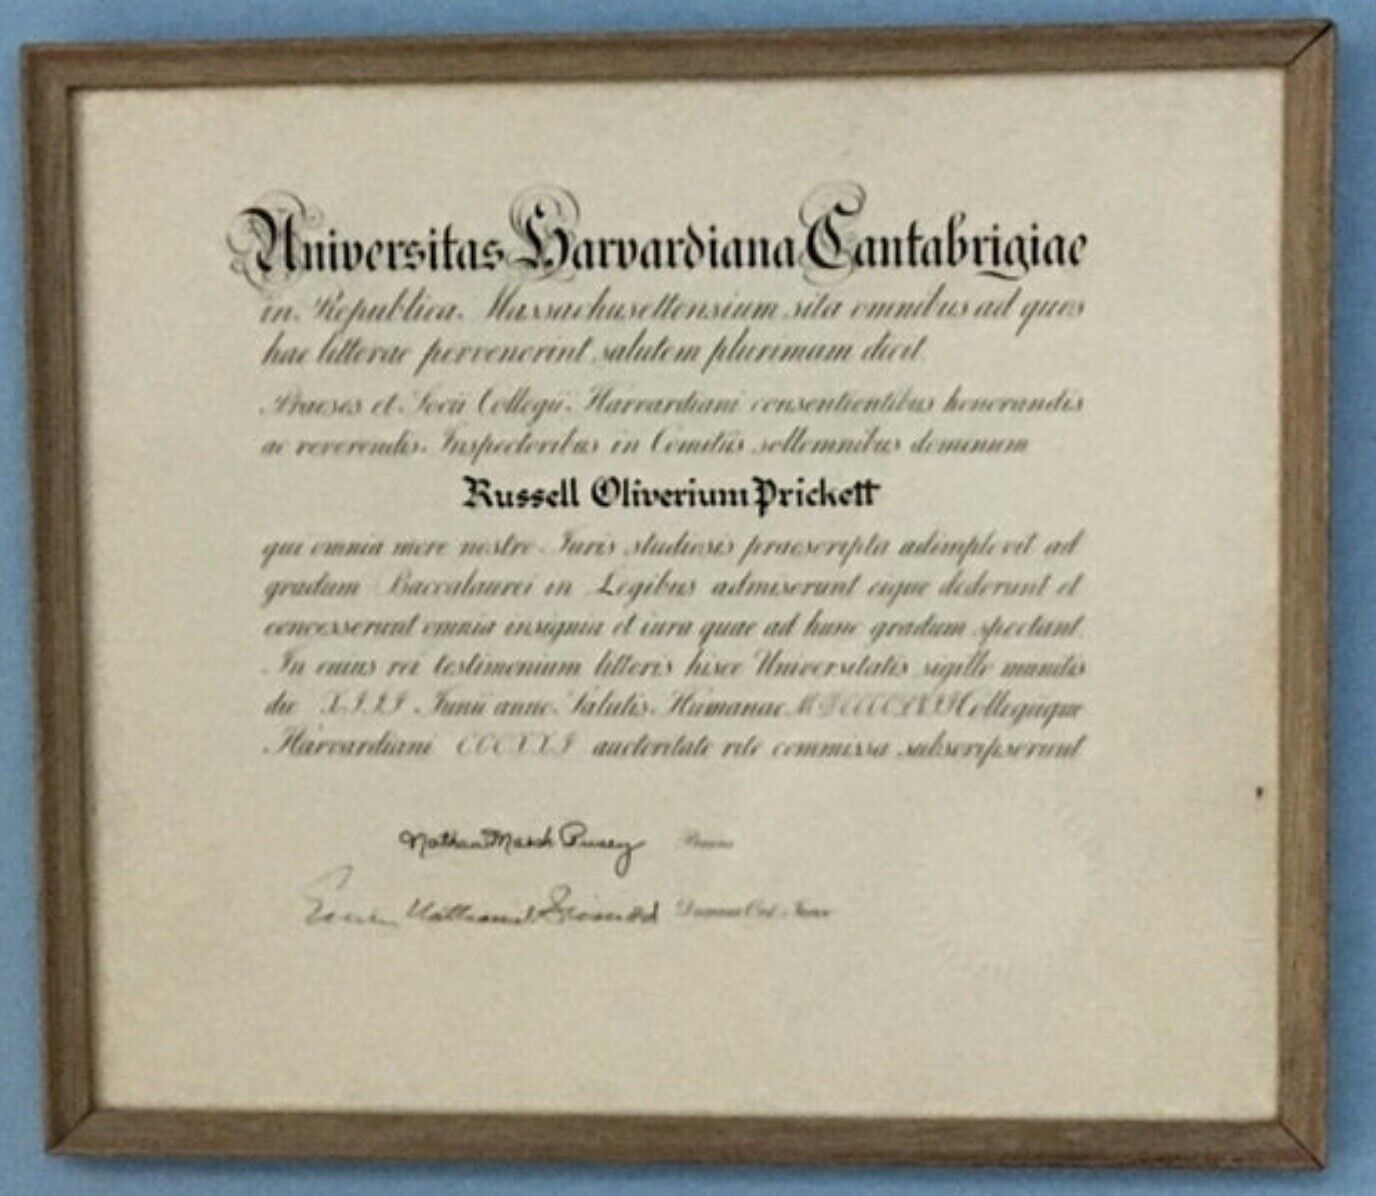 Harvard Law School Diploma Awarded in 1957, Hand Signed by Nathan Marsh Pusey